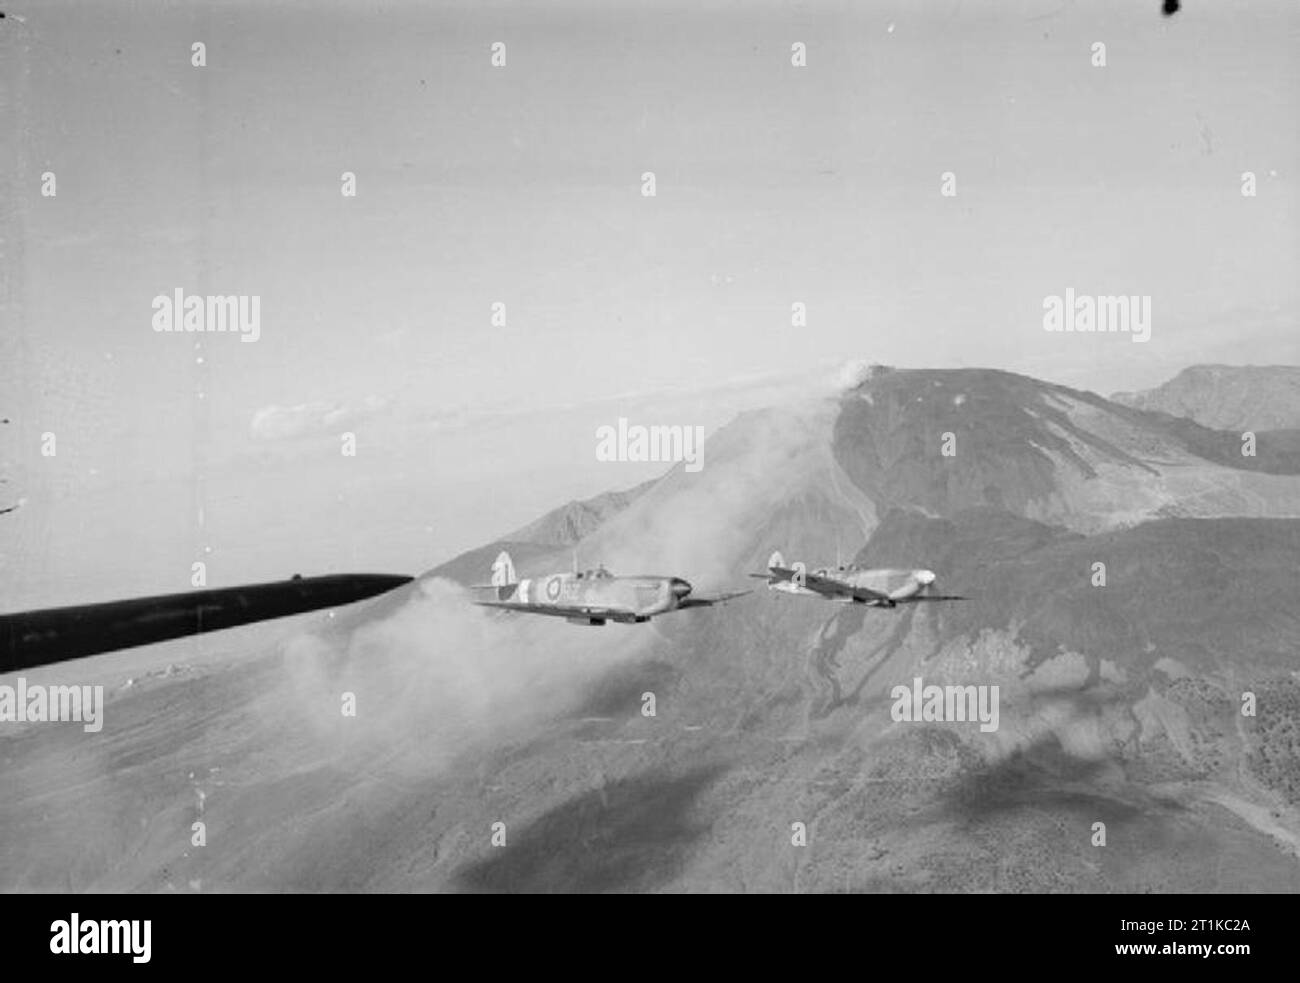 Royal Air Force- Italy, the Balkans and South East Europe, 1942-1945. Two Supermarine Spitfire Mark IXs, MA425 ?RZ-R? (nearest) and MH635 ?RZ-U?, of No 241 Squadron RAF, piloted by Flying Officers H Cogman and J V Macdonald respectively, flying past Mount Vesuvius while returning to their base at Madna, south-east of Campomarino, Italy, after a weather reconnaissance sortie over the Anzio beachhead. Stock Photo